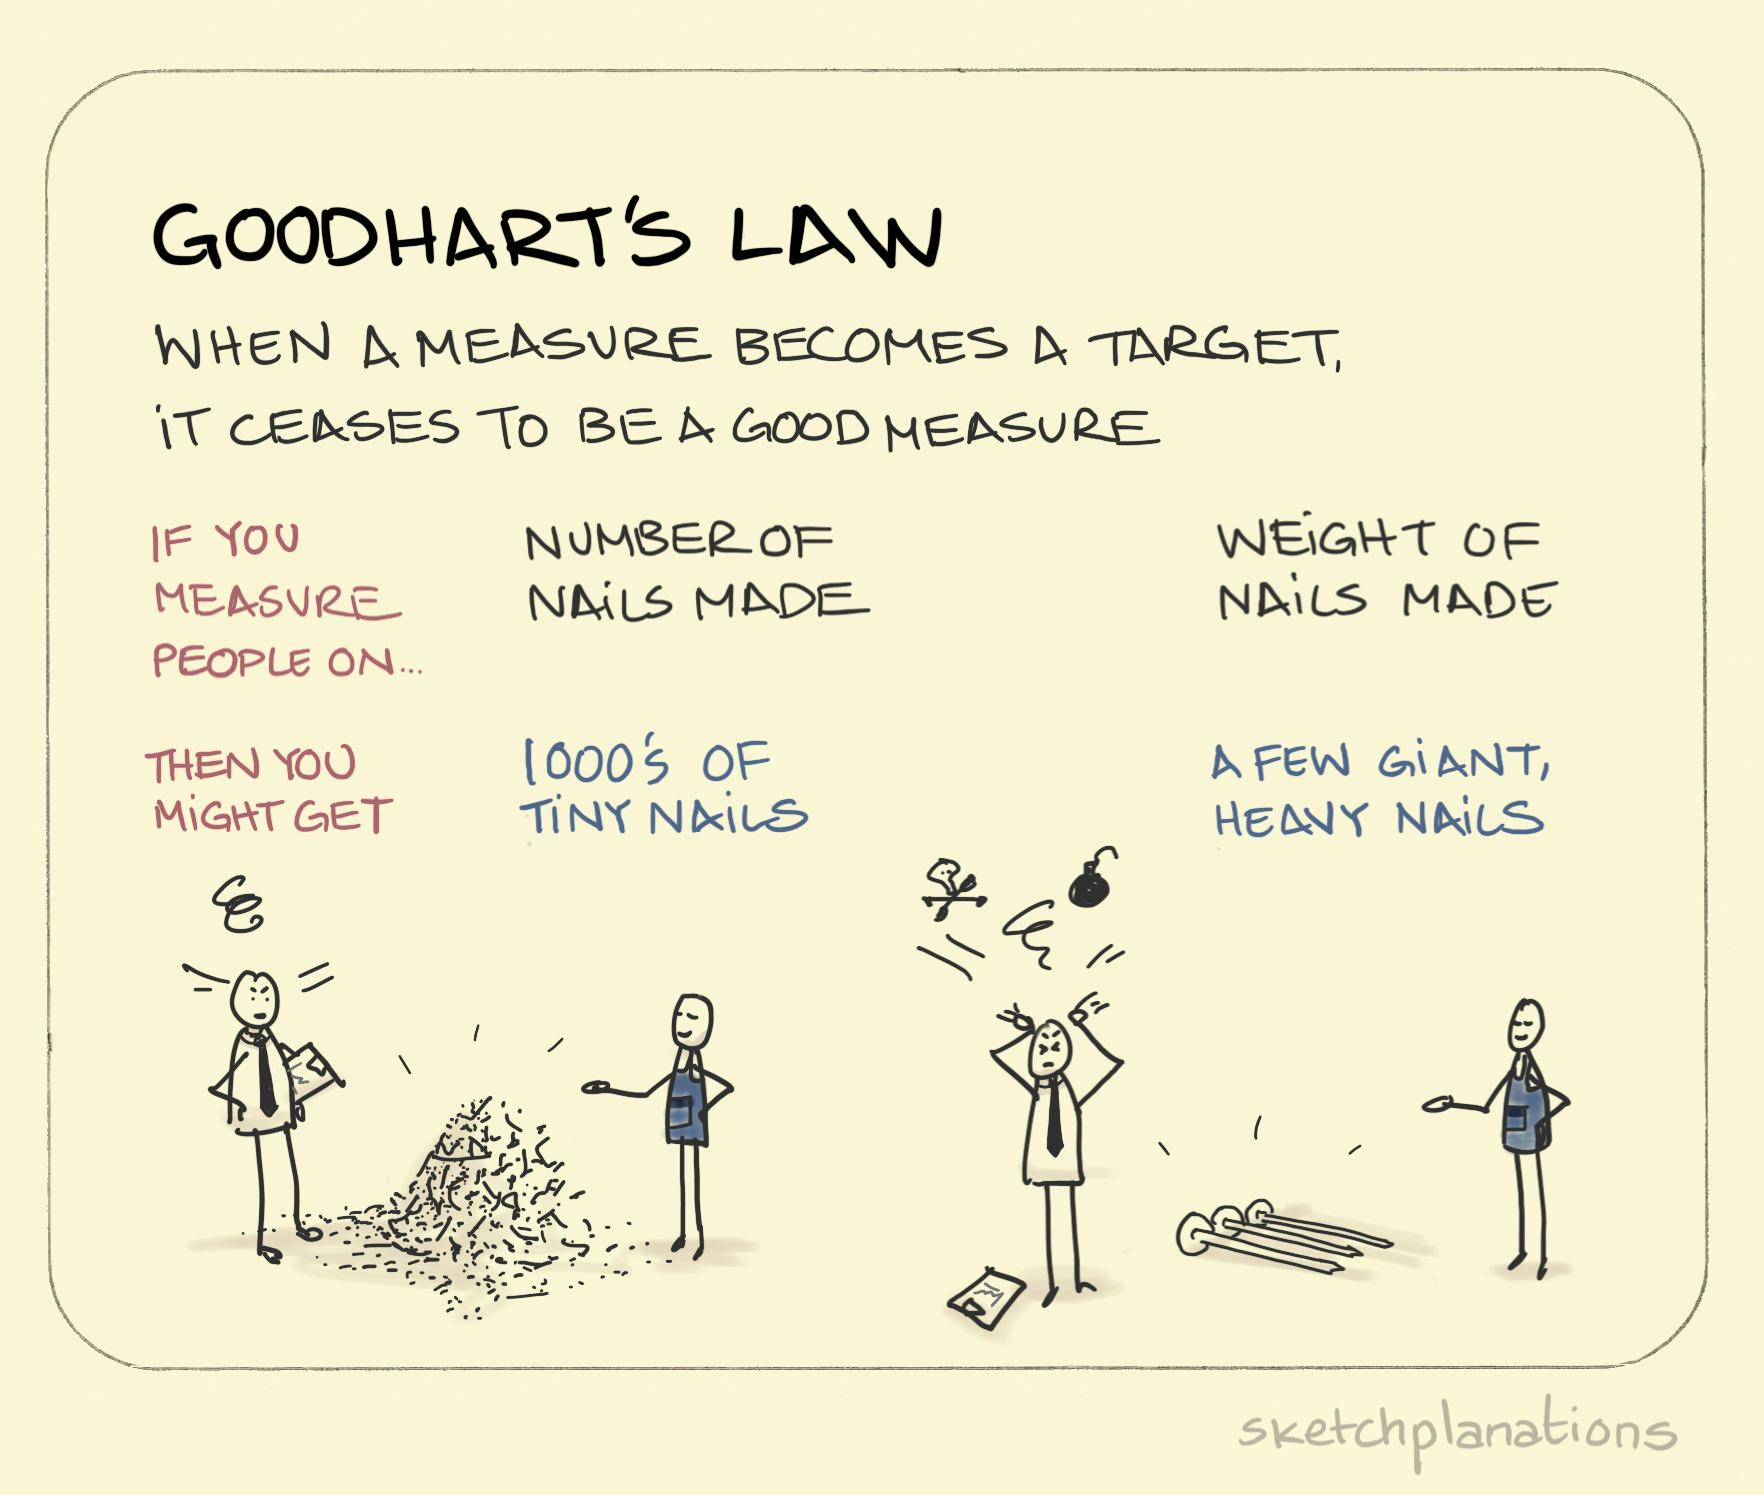 Goodhart's law illustration showing a manager frustrated by 1000's of tiny nails when measuring on number of nails made, and pulling their hair out when presented with giant nails when measuring on weight